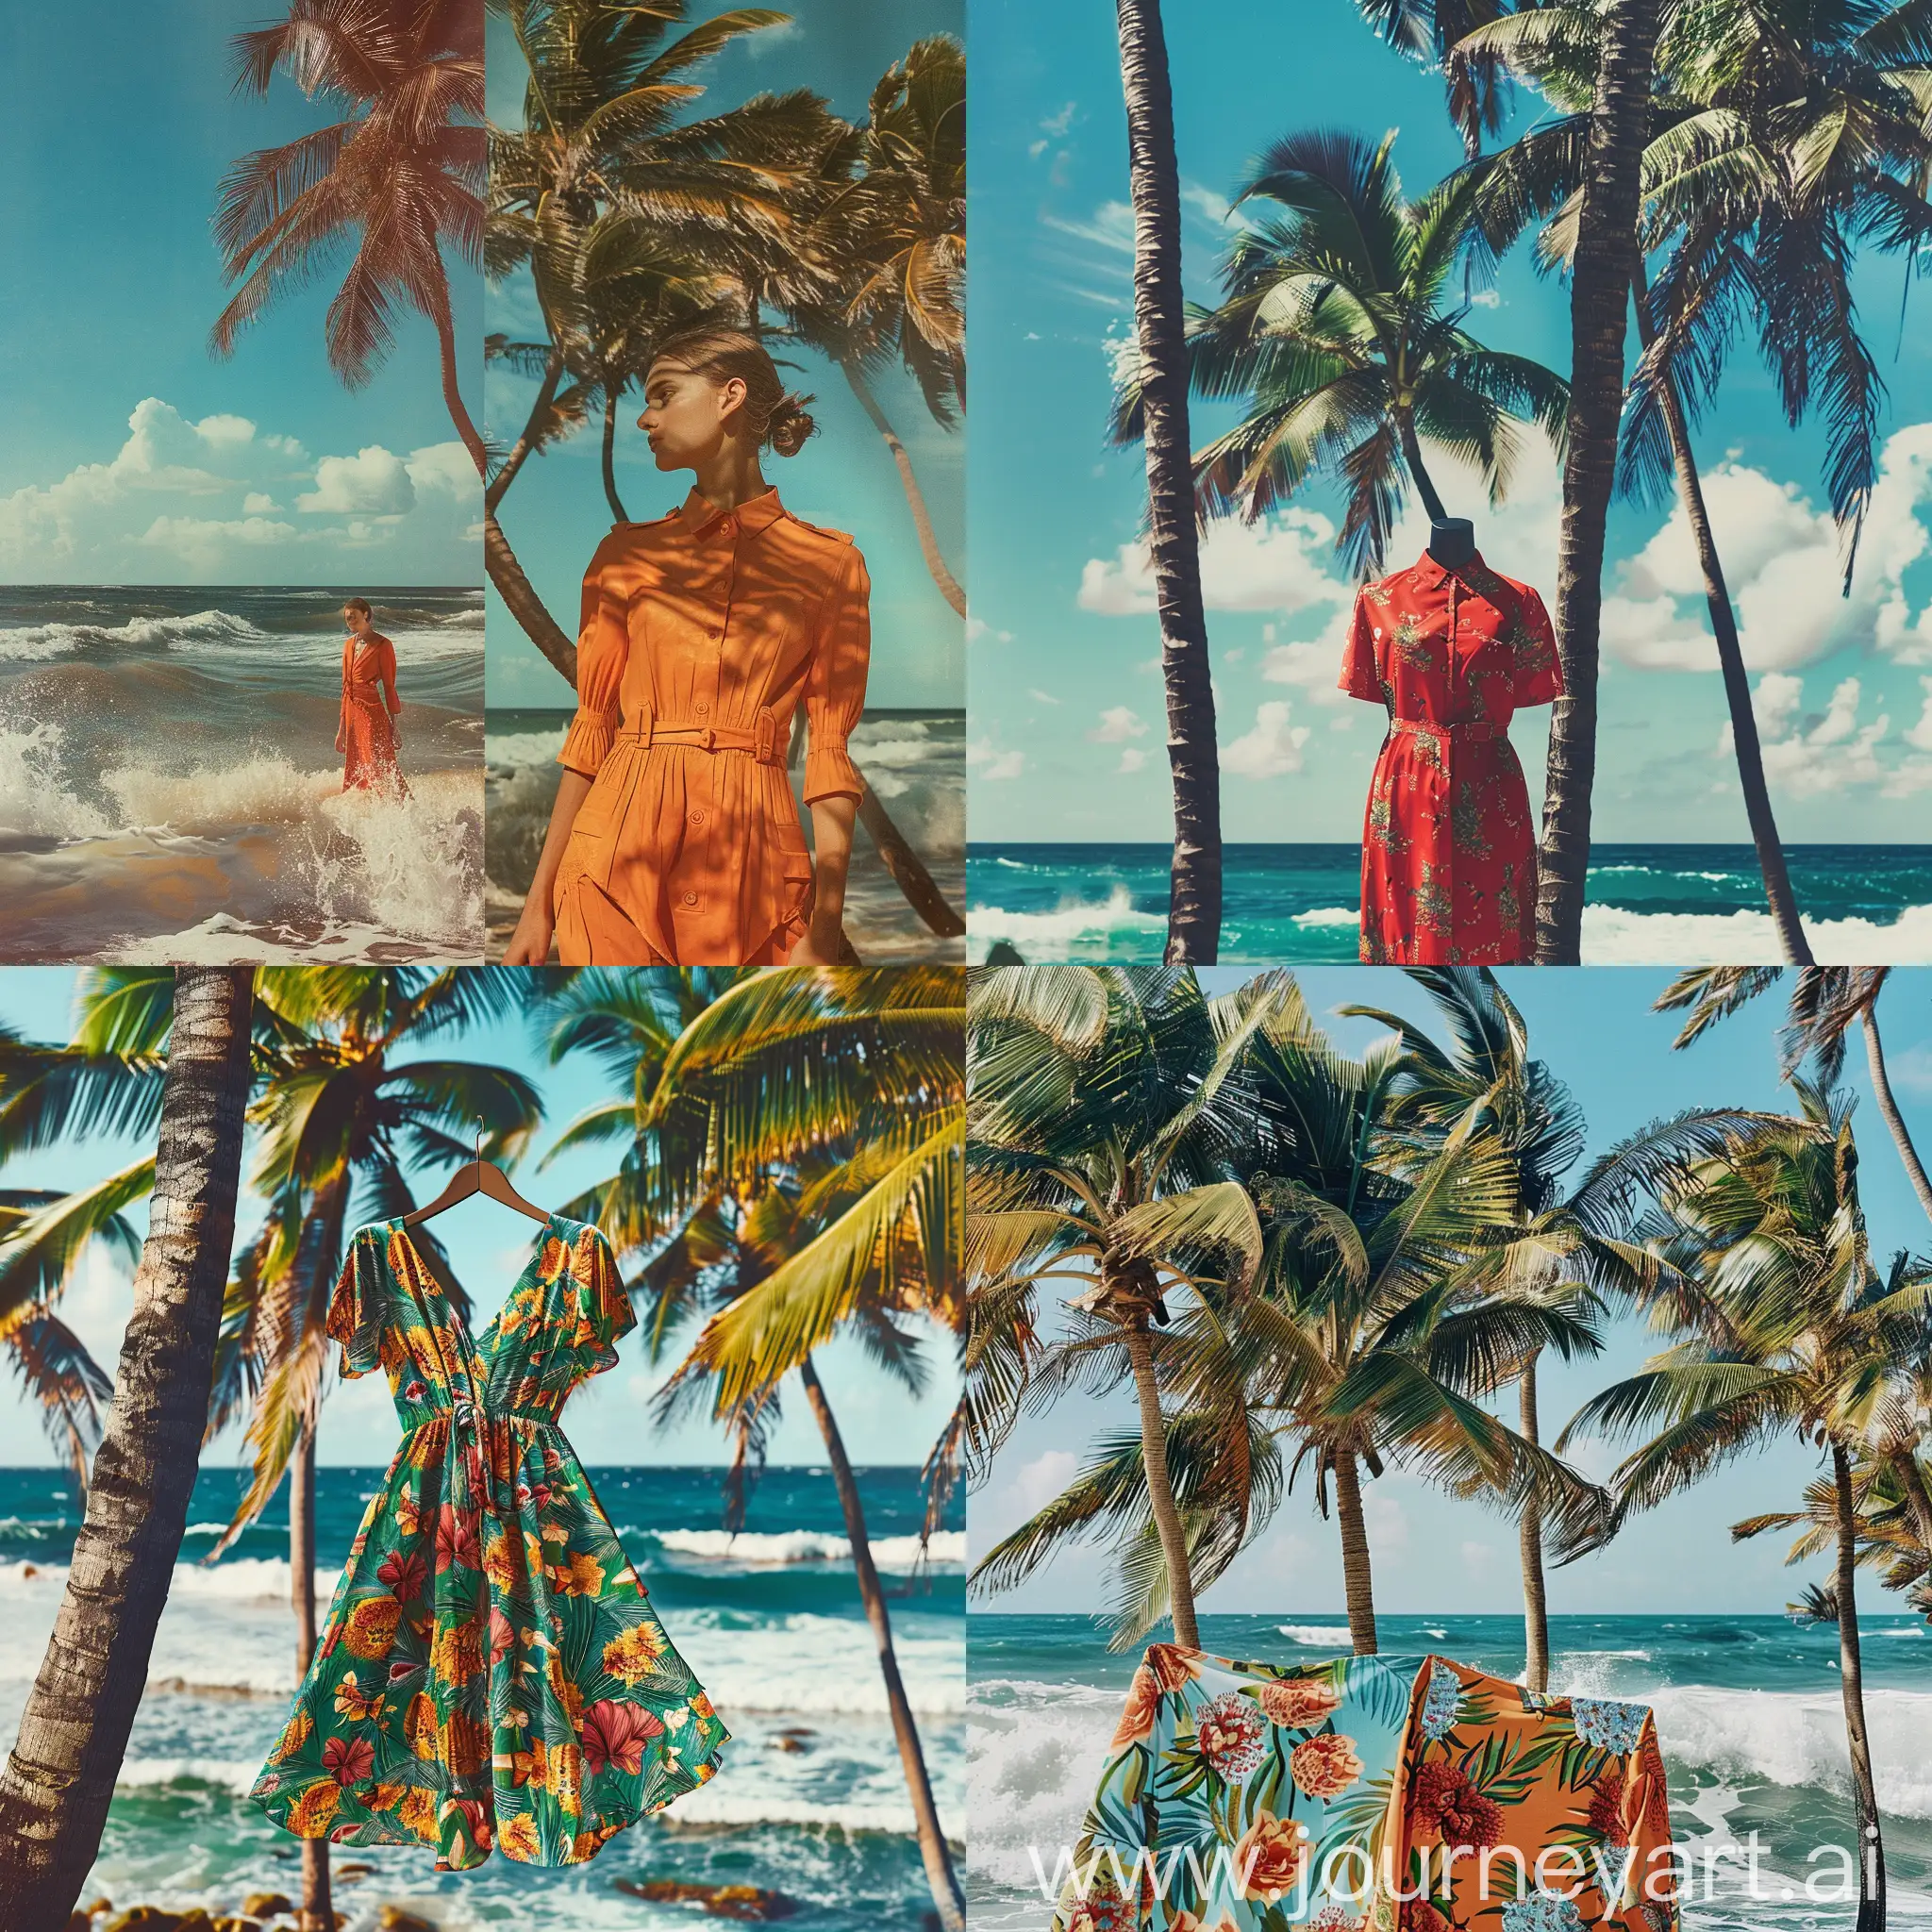 Showcase a stunning image of Reformation's latest sustainable fashion piece against a backdrop of palm trees and ocean waves, evoking the Miami beach vibe. Incorporate vibrant colors and natural lighting to highlight the garment's eco-friendly materials and stylish design.